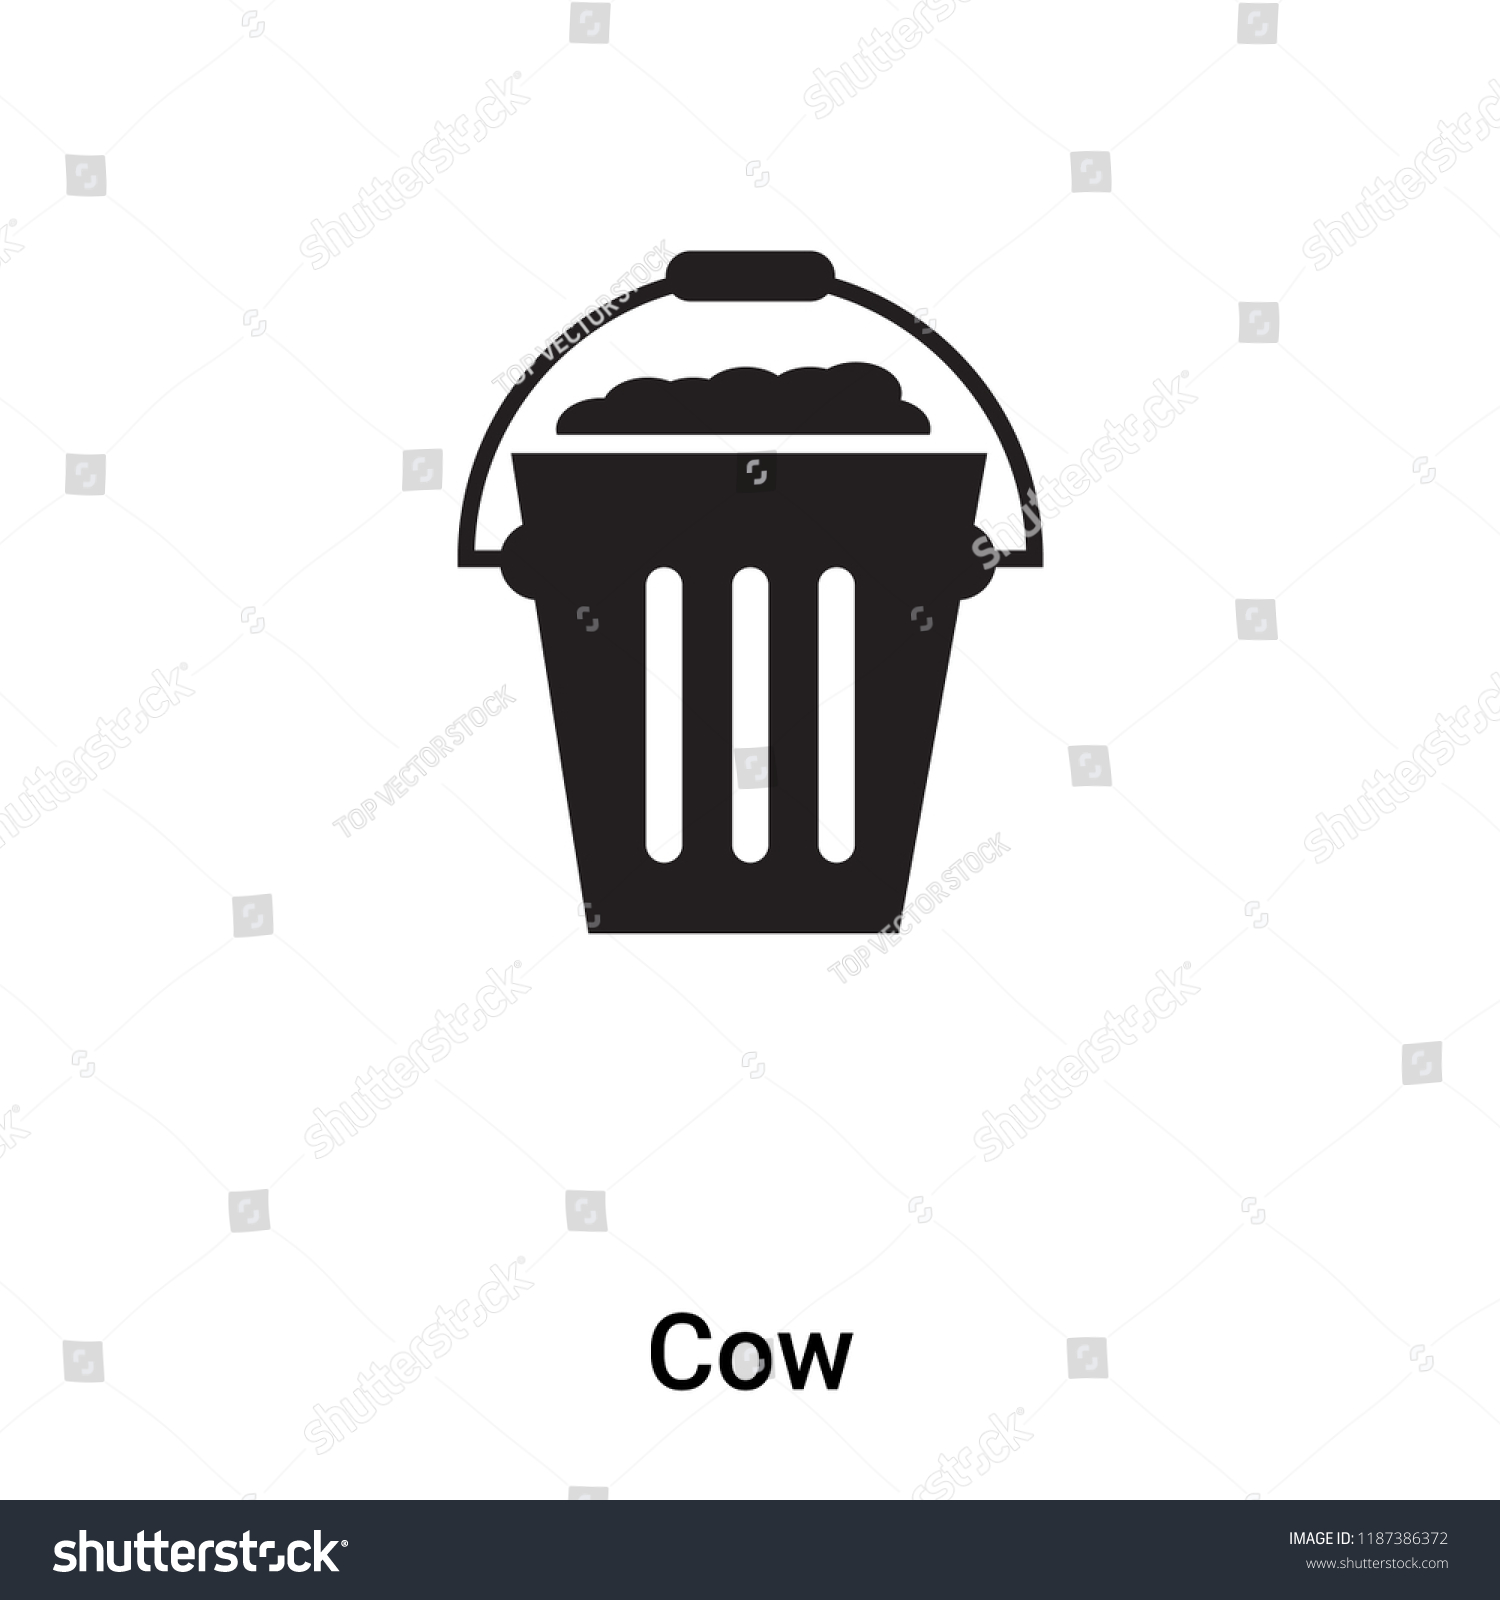 SVG of Cow icon vector isolated on white background, logo concept of Cow sign on transparent background, filled black symbol svg